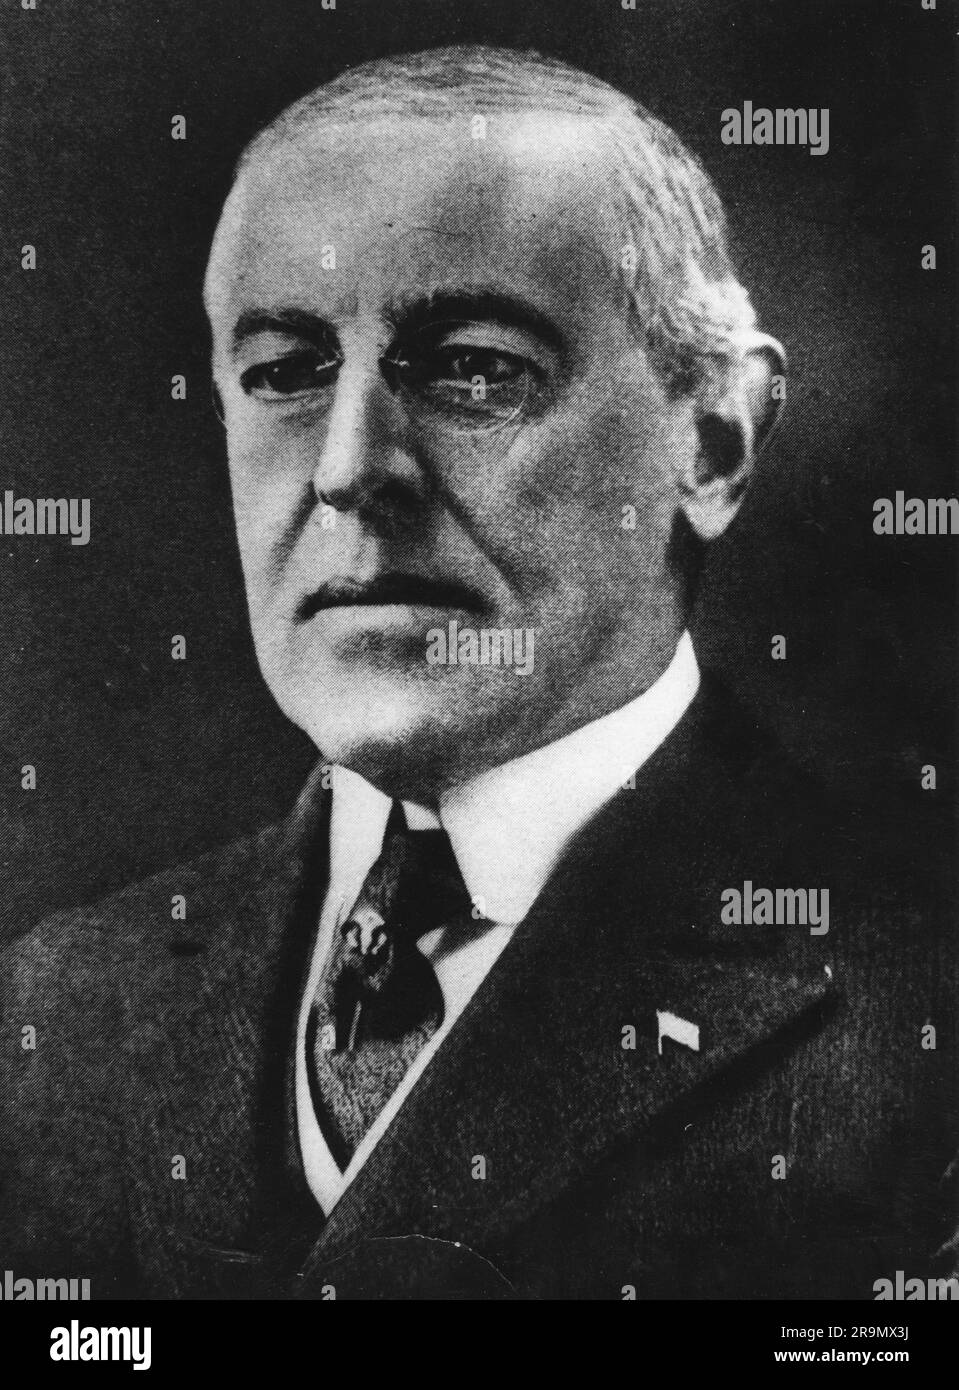 Wilson, Thomas Woodrow, 28.12.1856 - 3.2.1924, American politician (Democrats), ADDITIONAL-RIGHTS-CLEARANCE-INFO-NOT-AVAILABLE Stock Photo